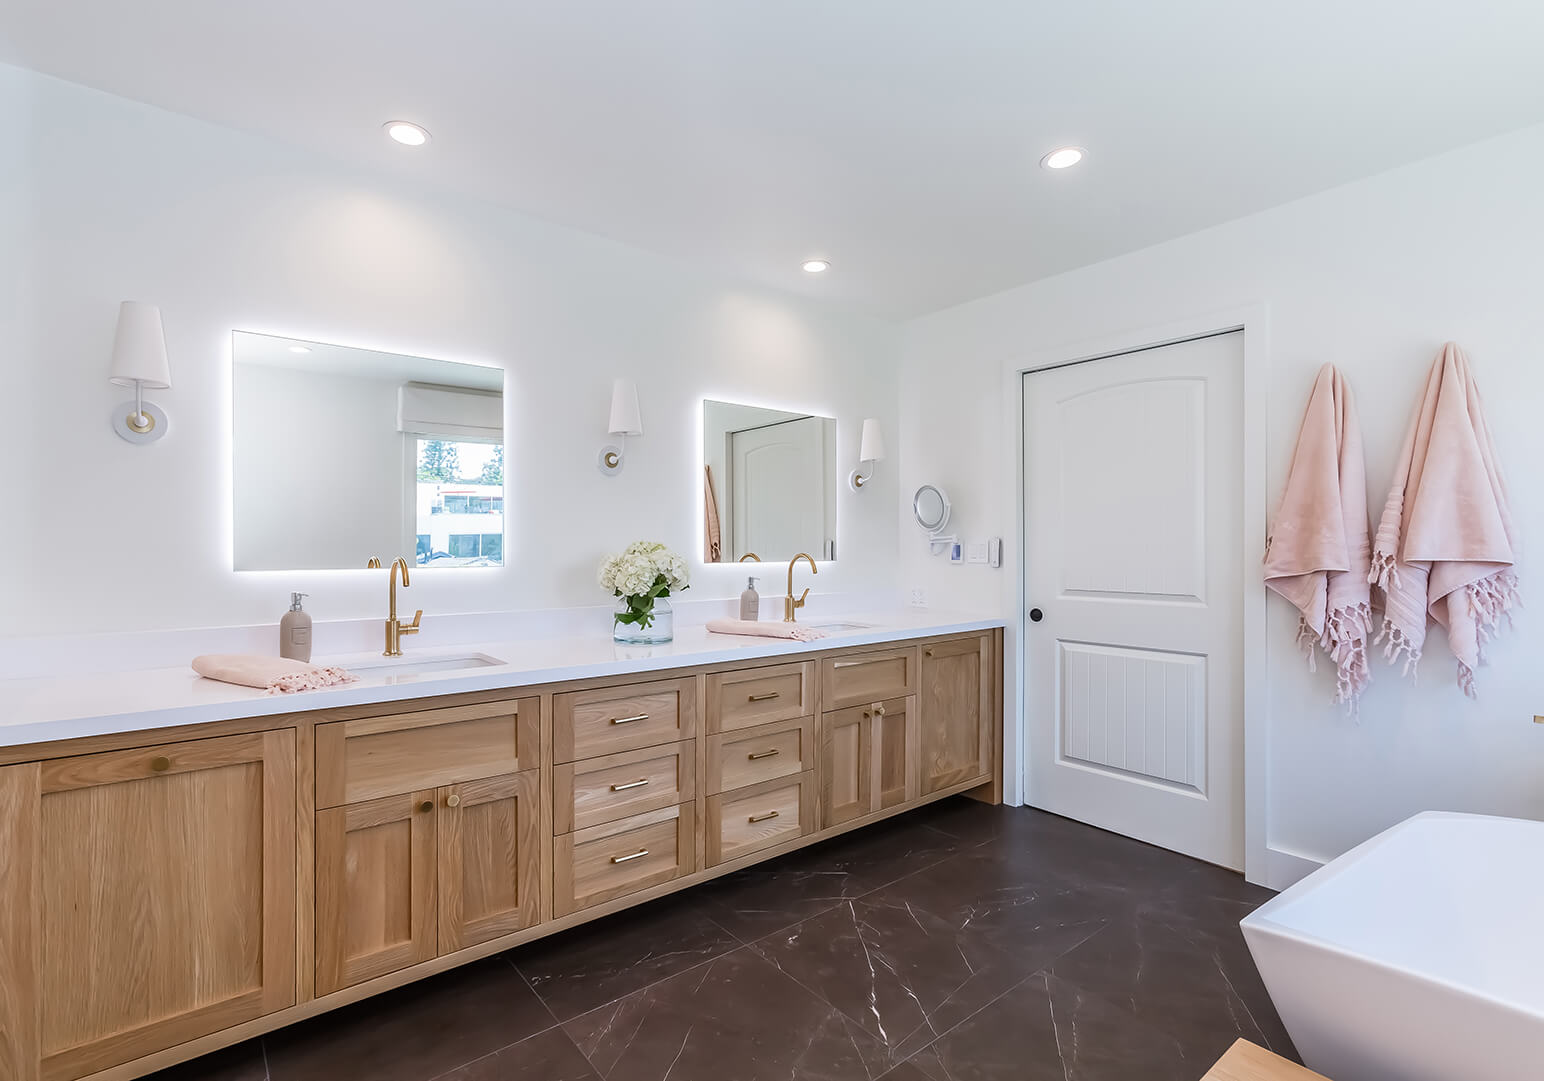 Hastings-Tile-Bath-Aurora-Mirrors-and-Chelsea-Tub-PHOTO-CREDIT-for-HILLARY-CAMPBELL